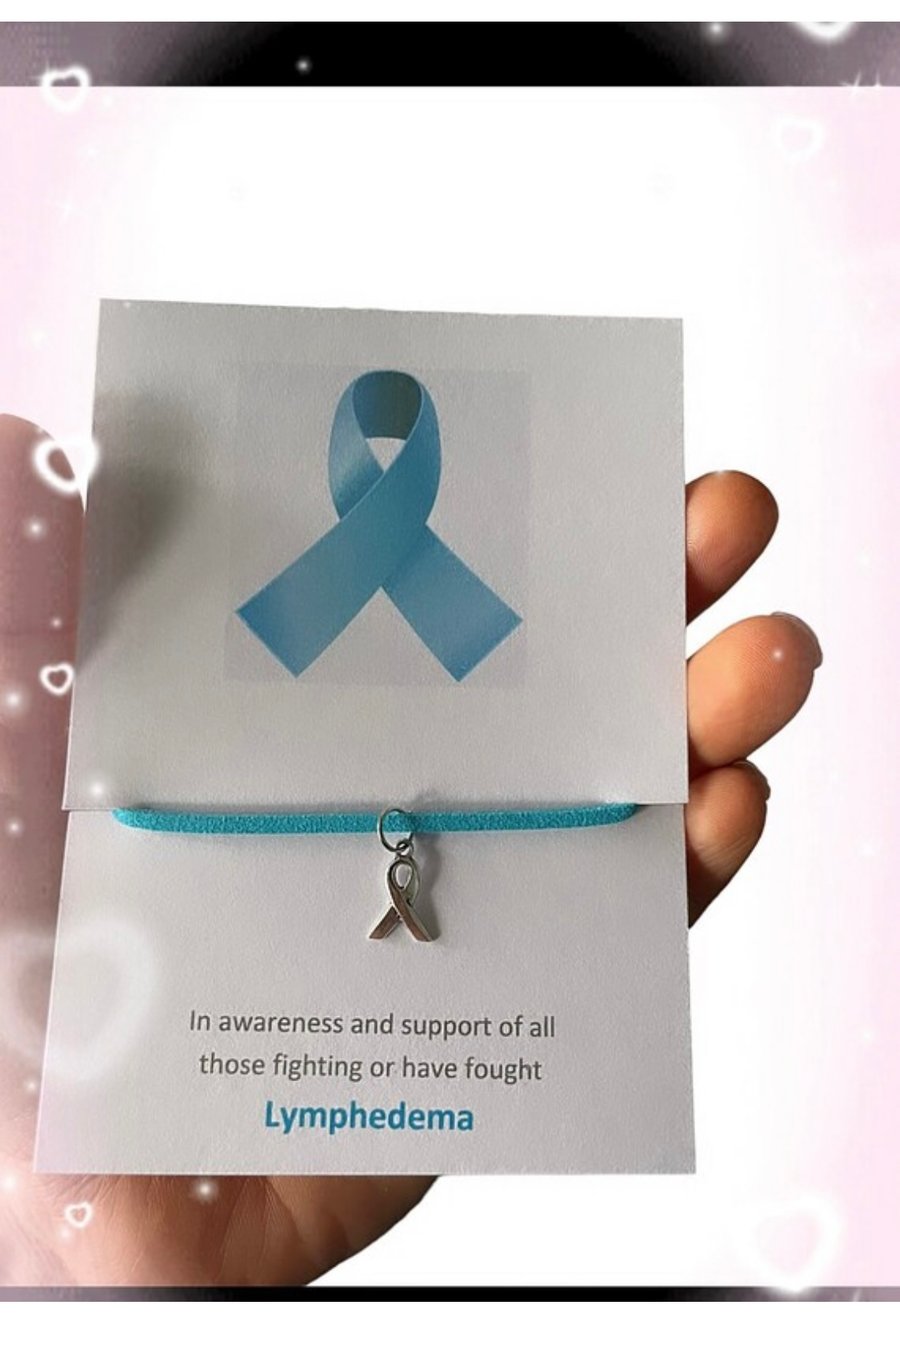 Set of 6 in awareness and support of lymphedema wish bracelets x6 set